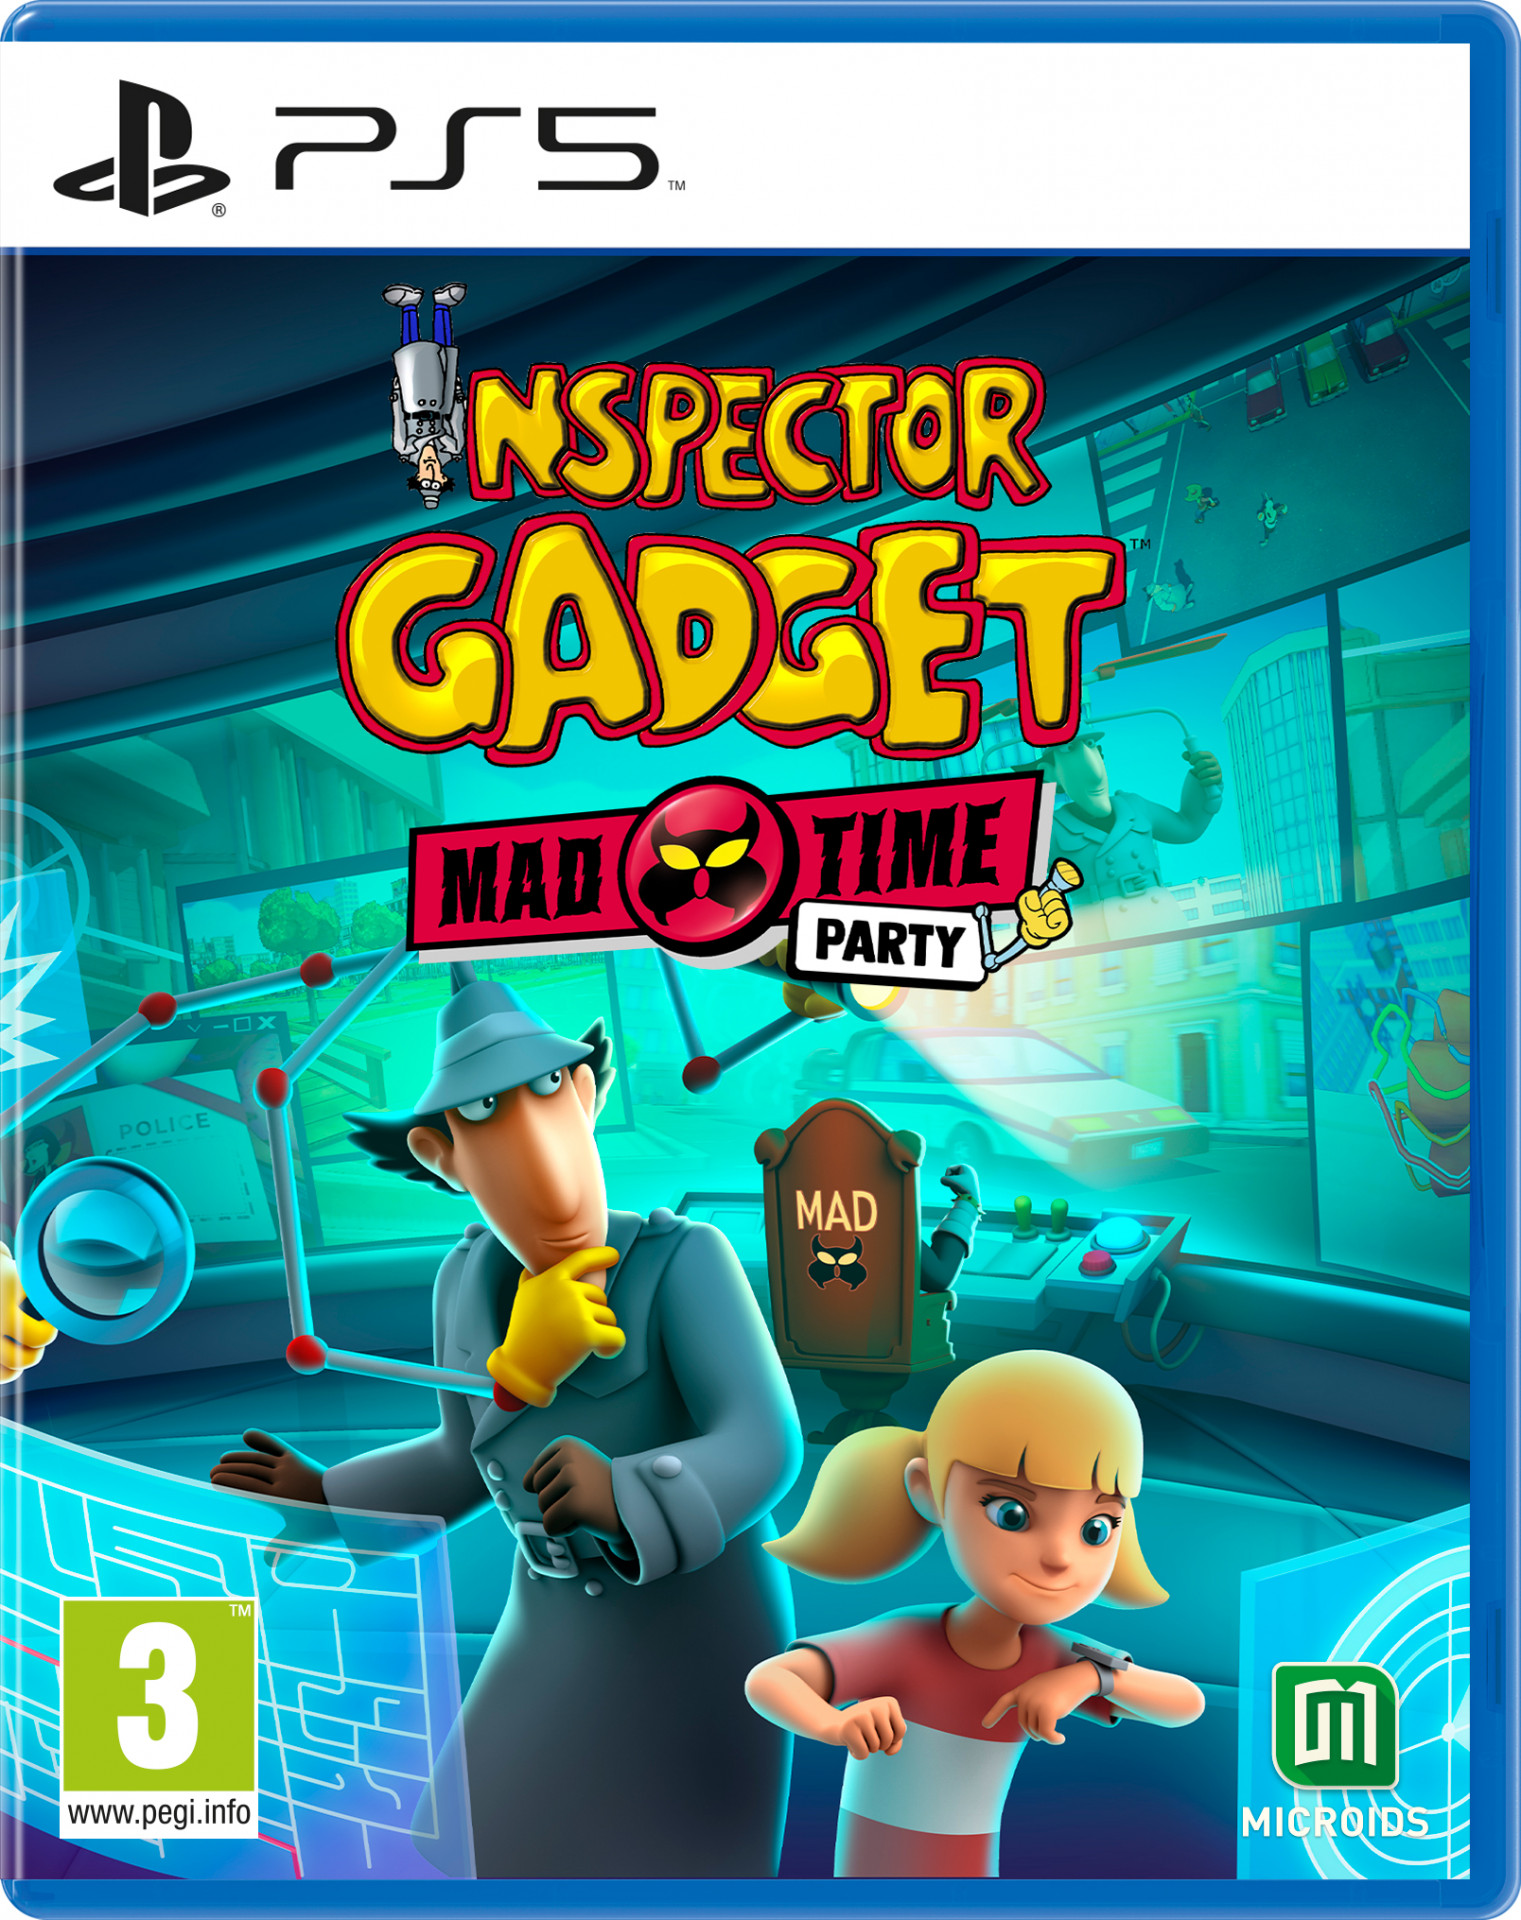 Inspector Gadget: Mad Time Party (PS5), Microids